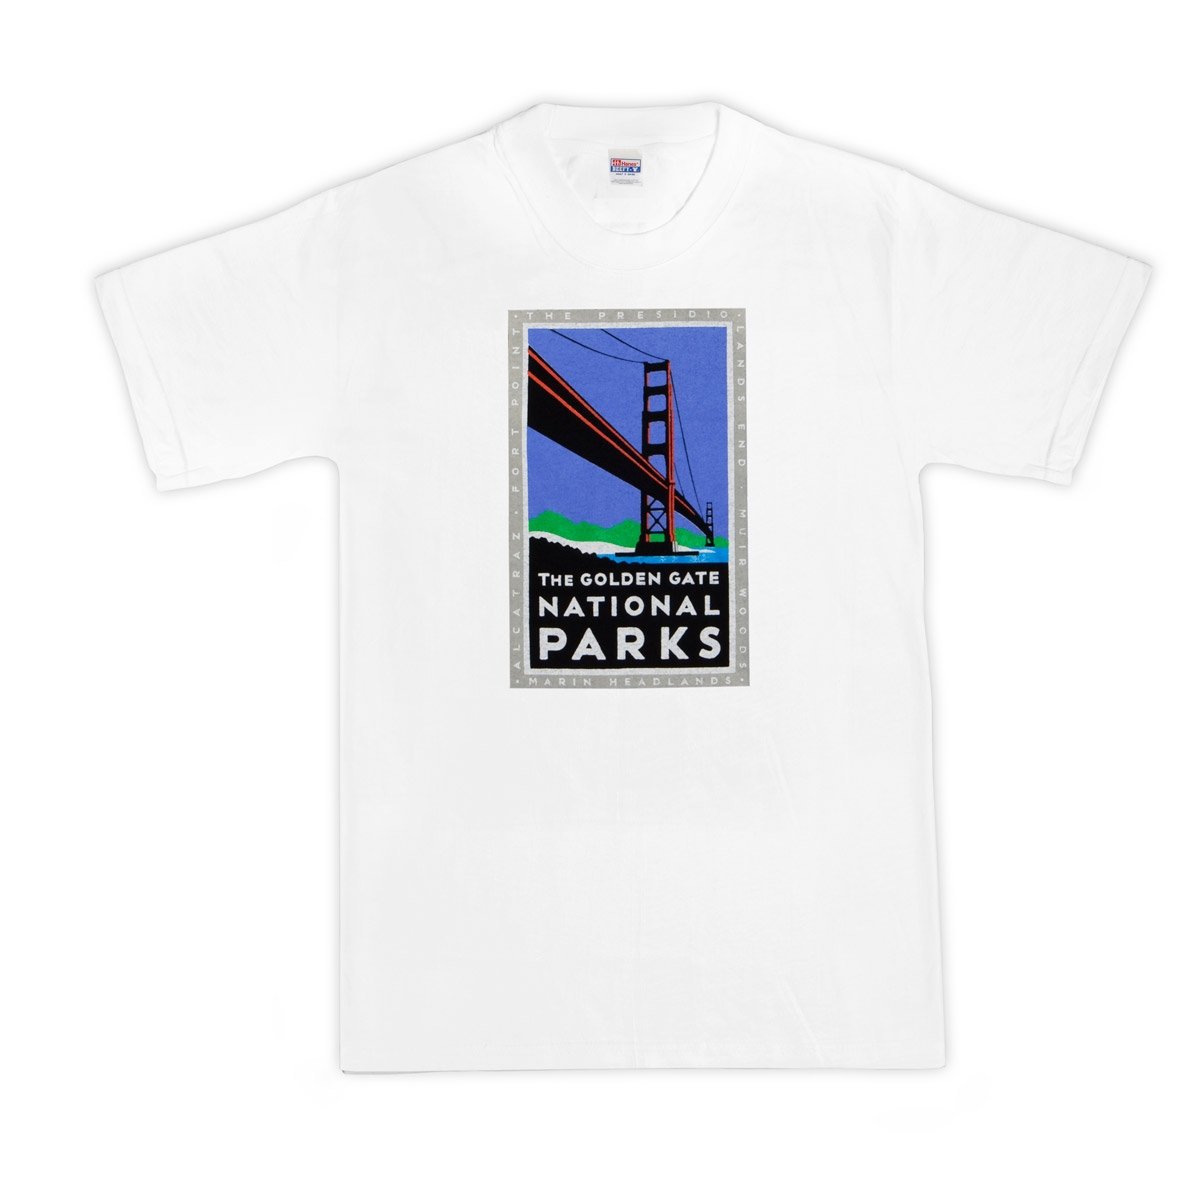 White graphic t-shirt with colorful screen-printed Golden Gate National Parks Bridge design on chest. Art by Michael Schwab.